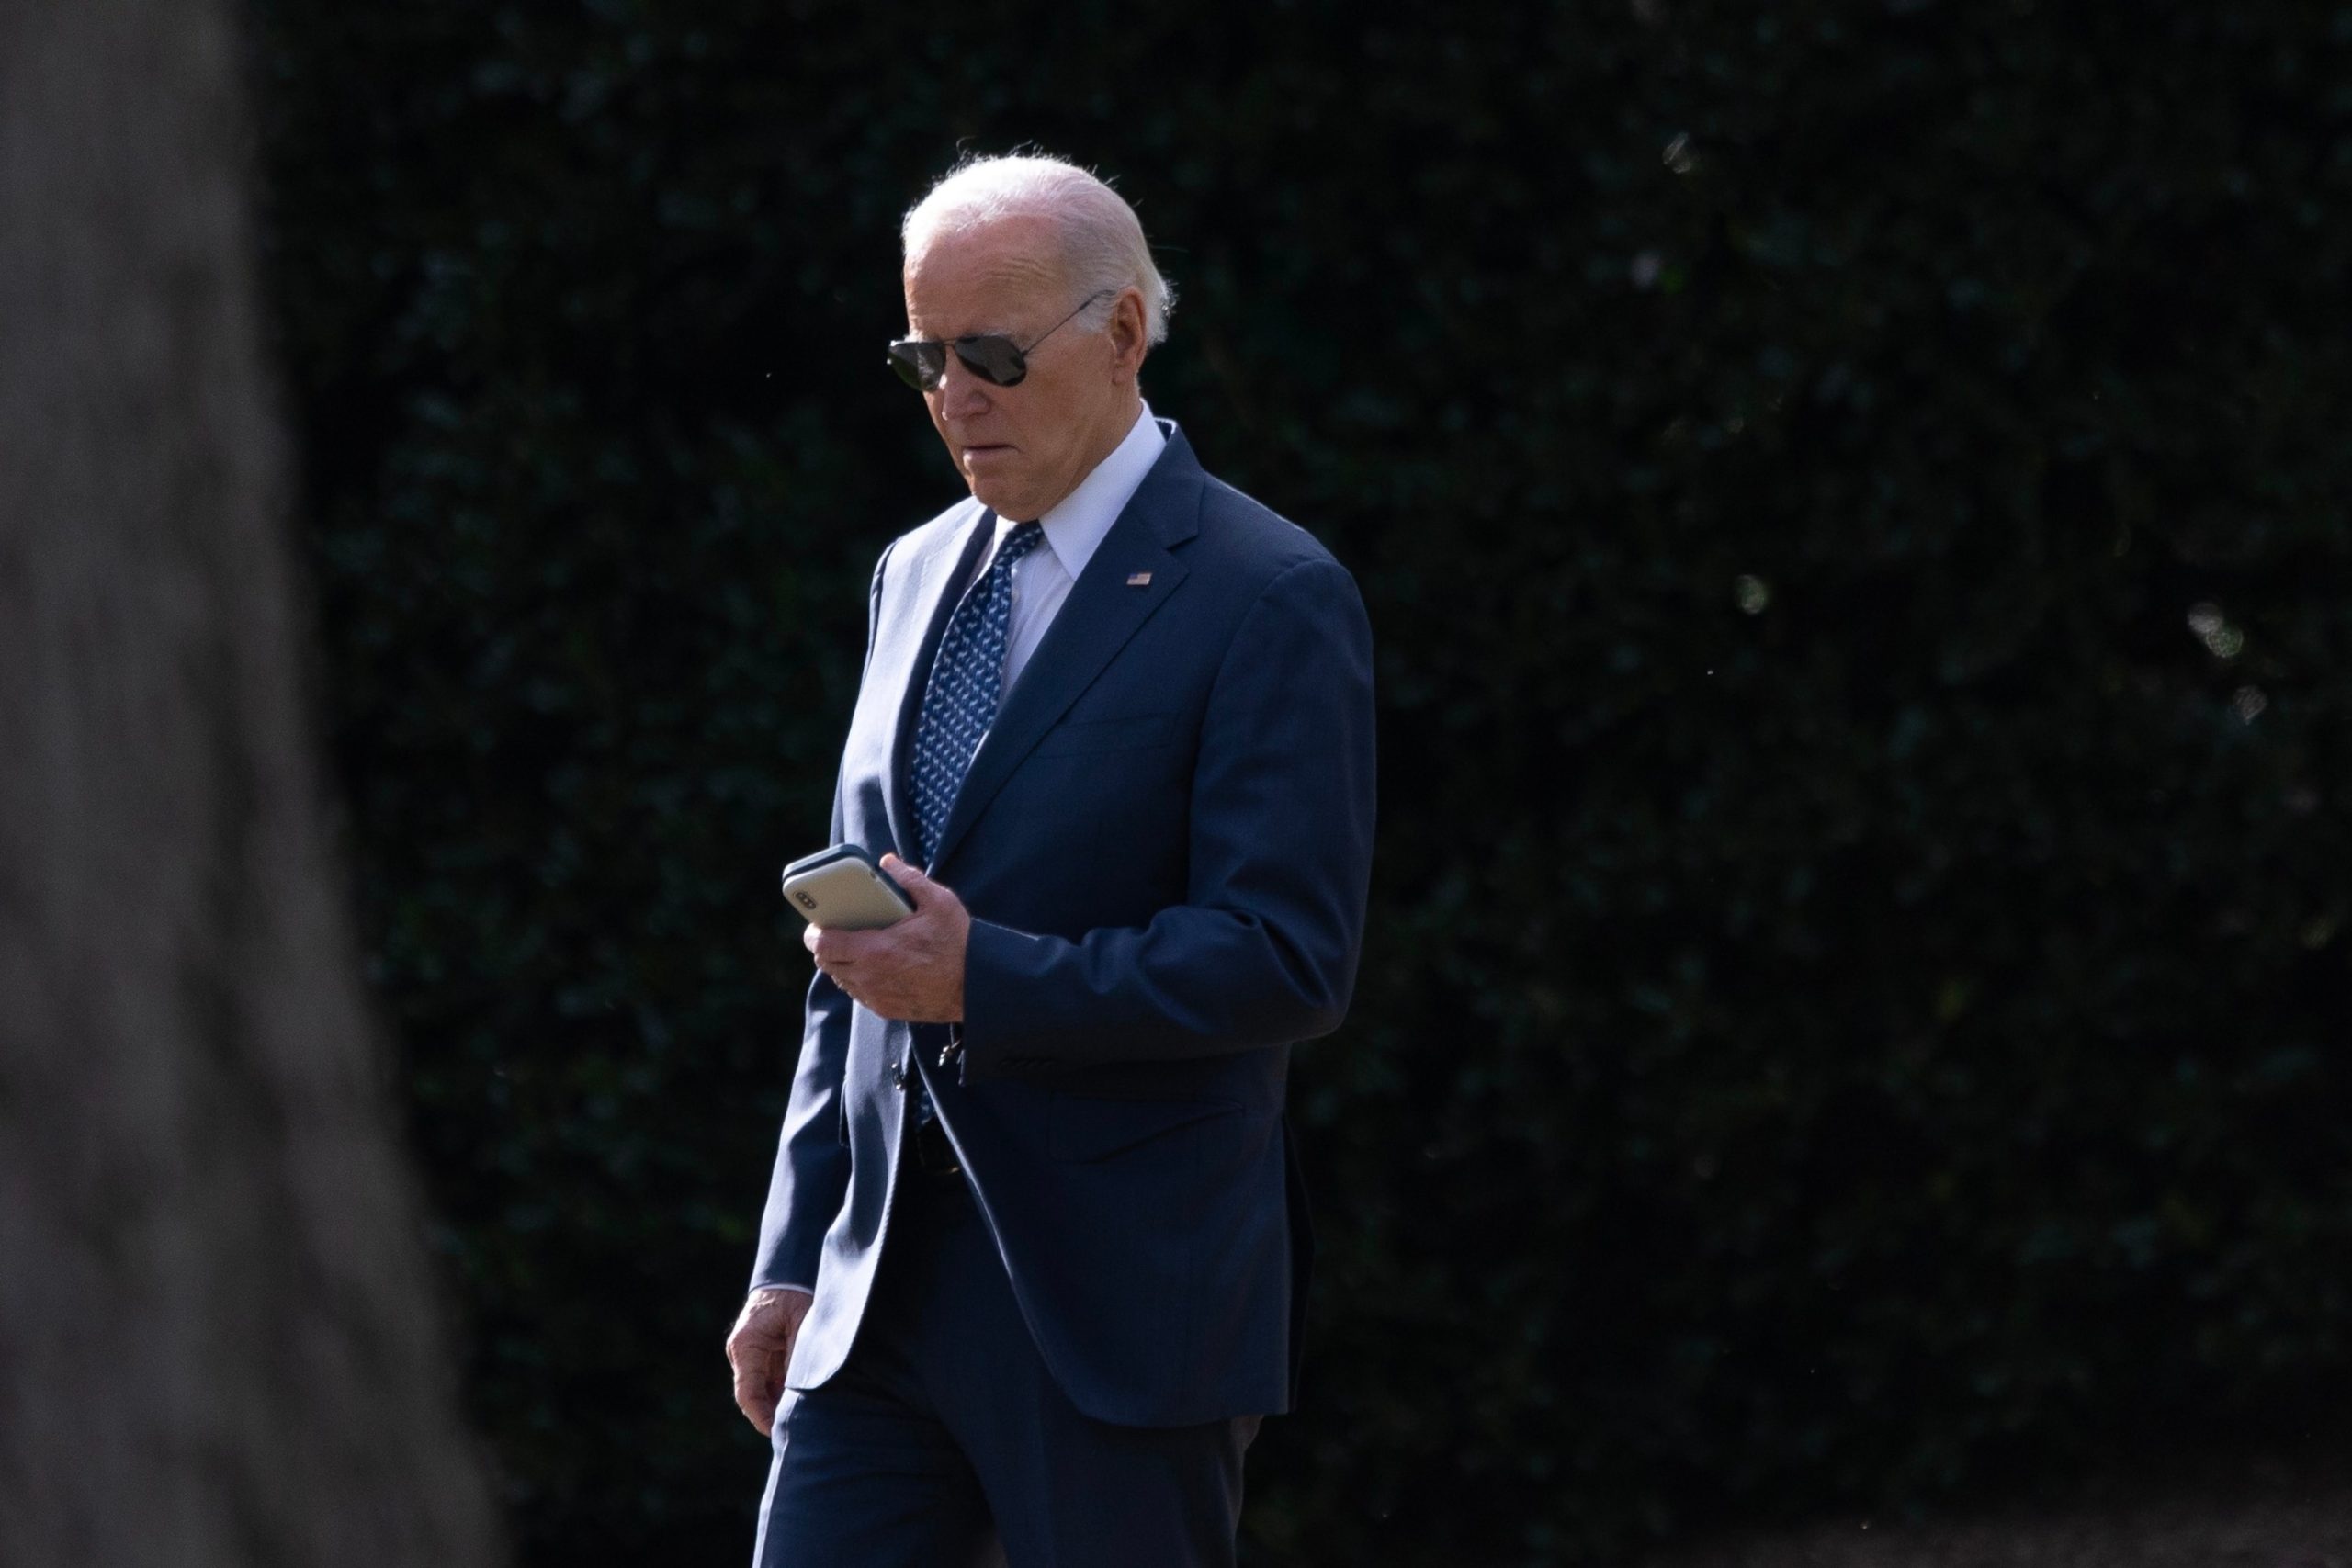 Biden Campaign Overcomes Security Concerns to Join TikTok: A Closer Look